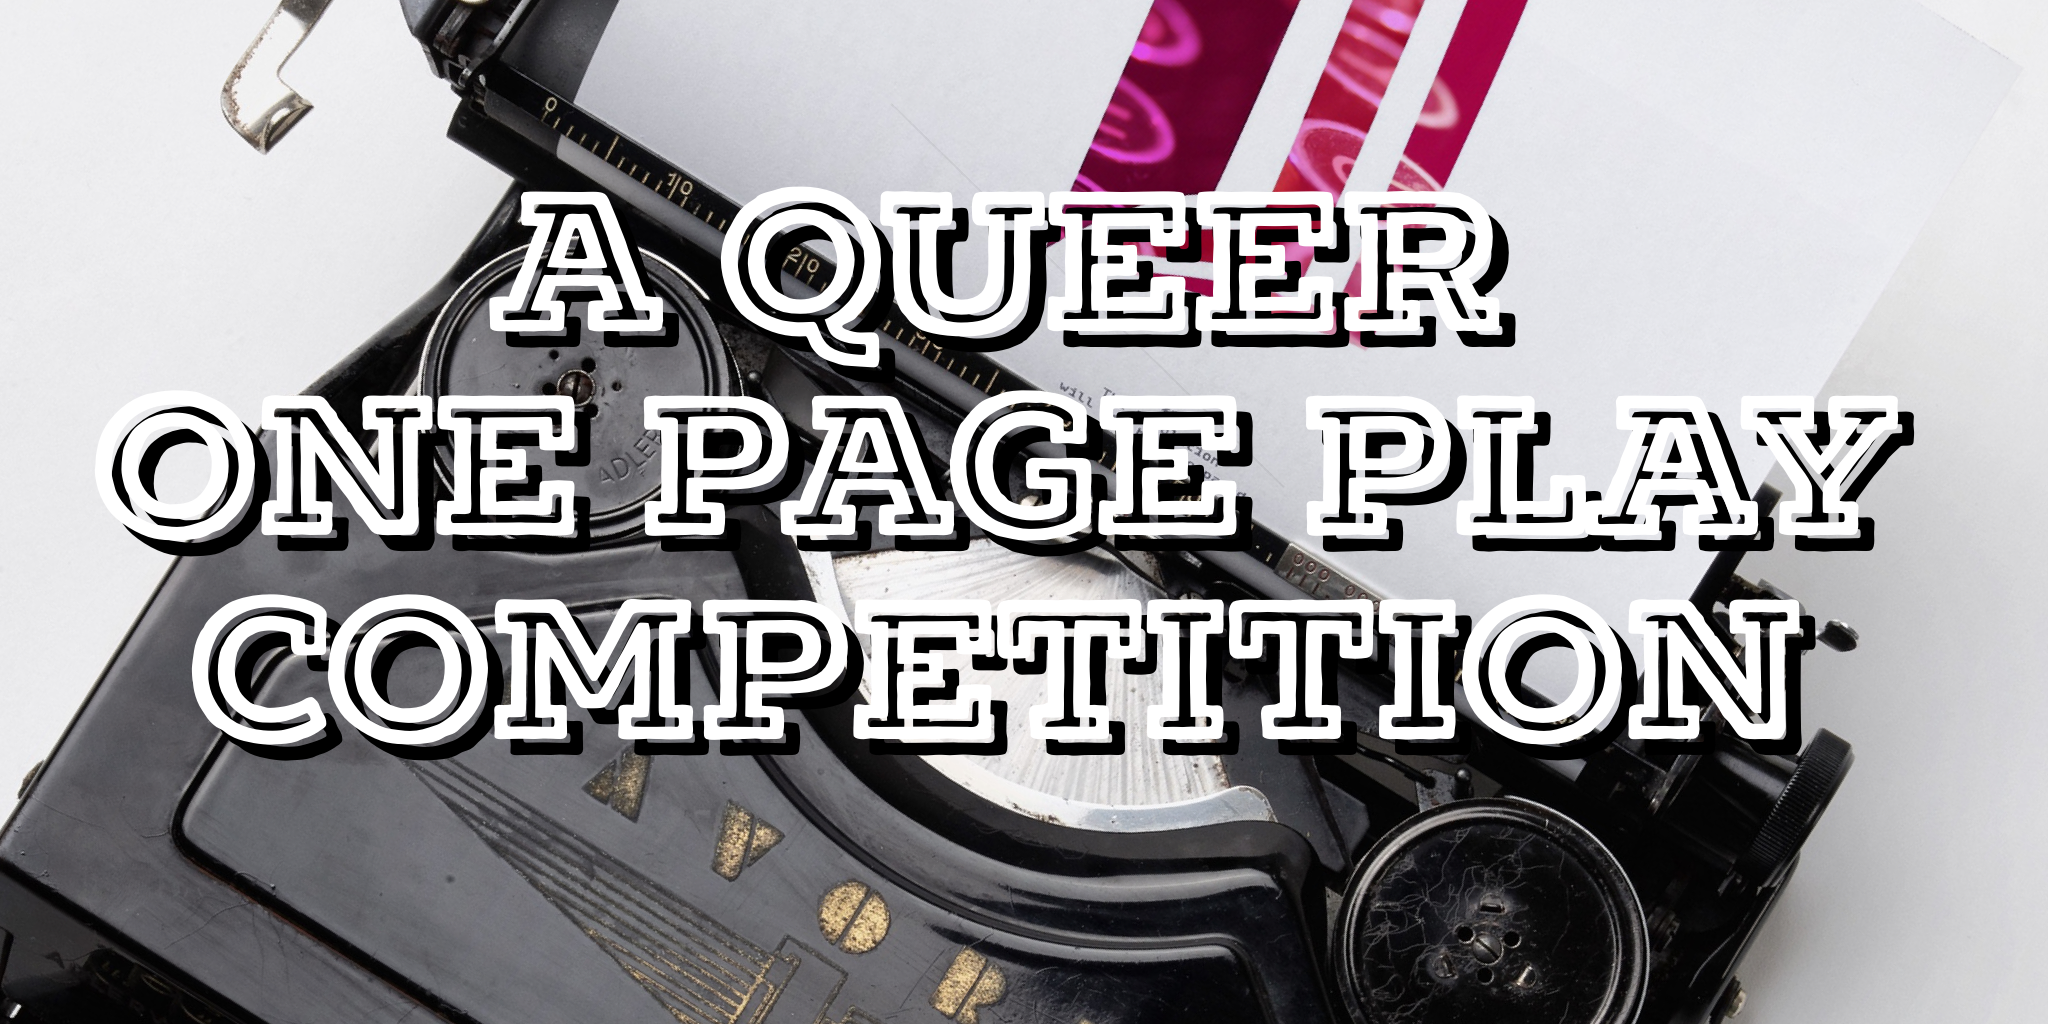 A Queer One Page Play Competition Entry